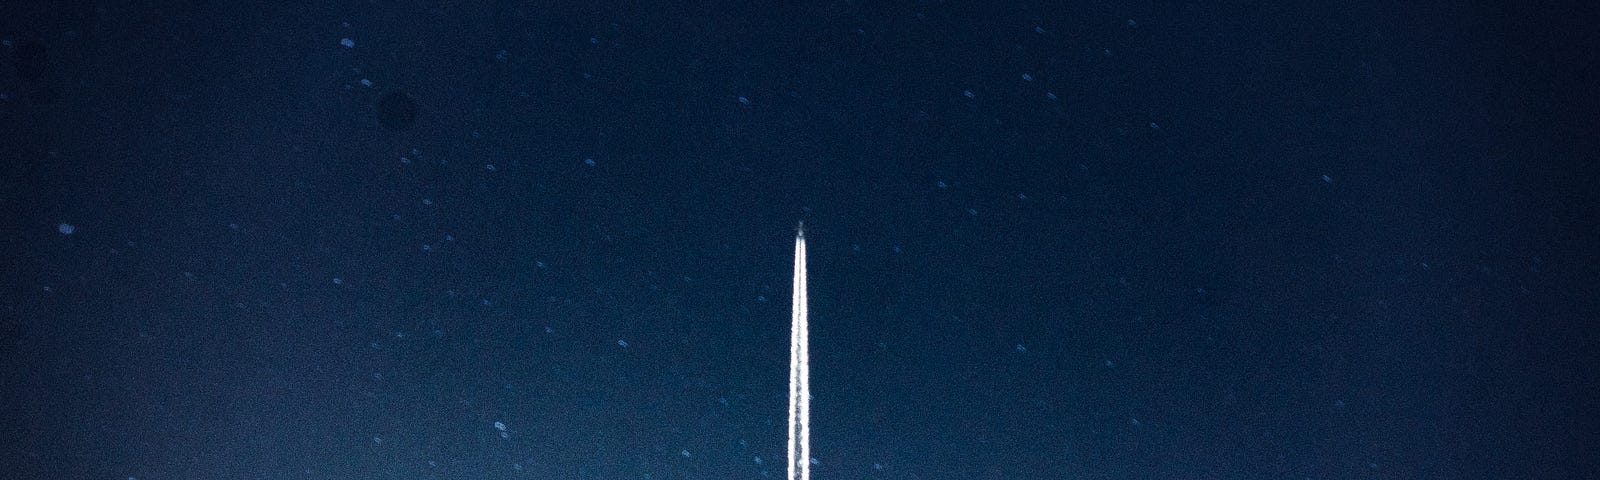 Photo of a distant airplane flying in a dusky sky